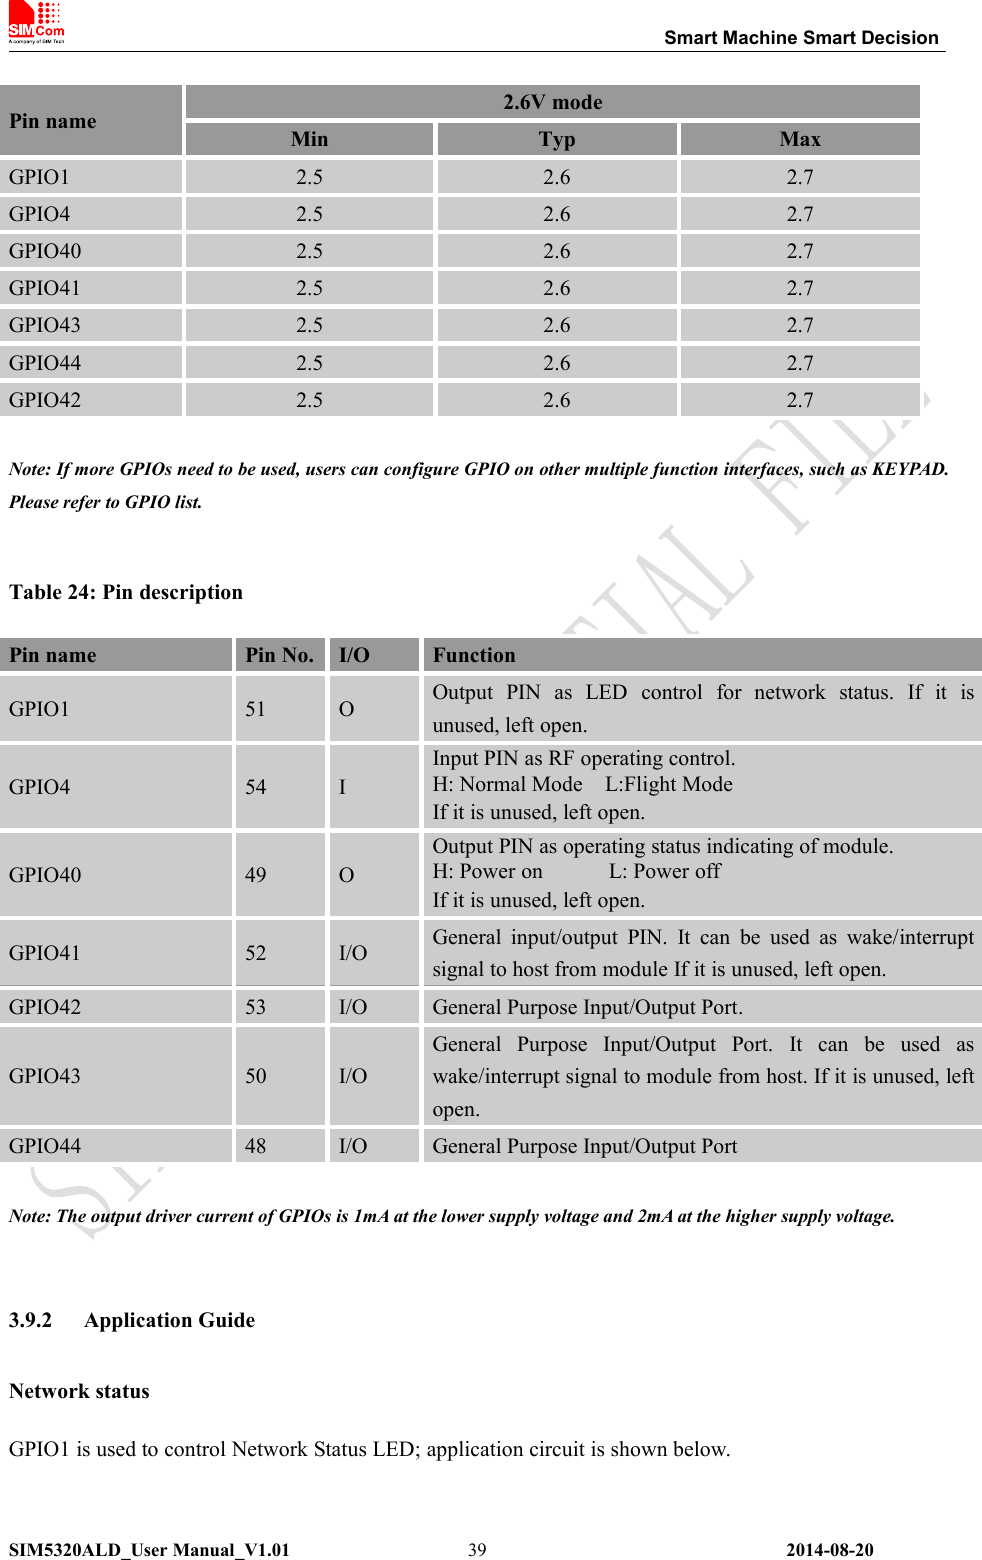 Smart Machine Smart DecisionSIM5320ALD_User Manual_V1.01 2014-08-2039Note: If more GPIOs need to be used, users can configure GPIO on other multiple function interfaces, such as KEYPAD.Please refer to GPIO list.Table 24: Pin descriptionNote: The output driver current of GPIOs is 1mA at the lower supply voltage and 2mA at the higher supply voltage.3.9.2 Application GuideNetwork statusGPIO1 is used to control Network Status LED; application circuit is shown below.Pin name 2.6V modeMin Typ MaxGPIO1 2.5 2.6 2.7GPIO4 2.5 2.6 2.7GPIO40 2.5 2.6 2.7GPIO41 2.5 2.6 2.7GPIO43 2.5 2.6 2.7GPIO44 2.5 2.6 2.7GPIO42 2.5 2.6 2.7Pin name Pin No. I/O FunctionGPIO1 51 O Output PIN as LED control for network status. If it isunused, left open.GPIO4 54 IInput PIN as RF operating control.H: Normal Mode L:Flight ModeIf it is unused, left open.GPIO40 49 OOutput PIN as operating status indicating of module.H: Power on L: Power offIf it is unused, left open.GPIO41 52 I/O General input/output PIN. It can be used as wake/interruptsignal to host from module If it is unused, left open.GPIO42 53 I/O General Purpose Input/Output Port.GPIO43 50 I/OGeneral Purpose Input/Output Port. It can be used aswake/interrupt signal to module from host. If it is unused, leftopen.GPIO44 48 I/O General Purpose Input/Output Port